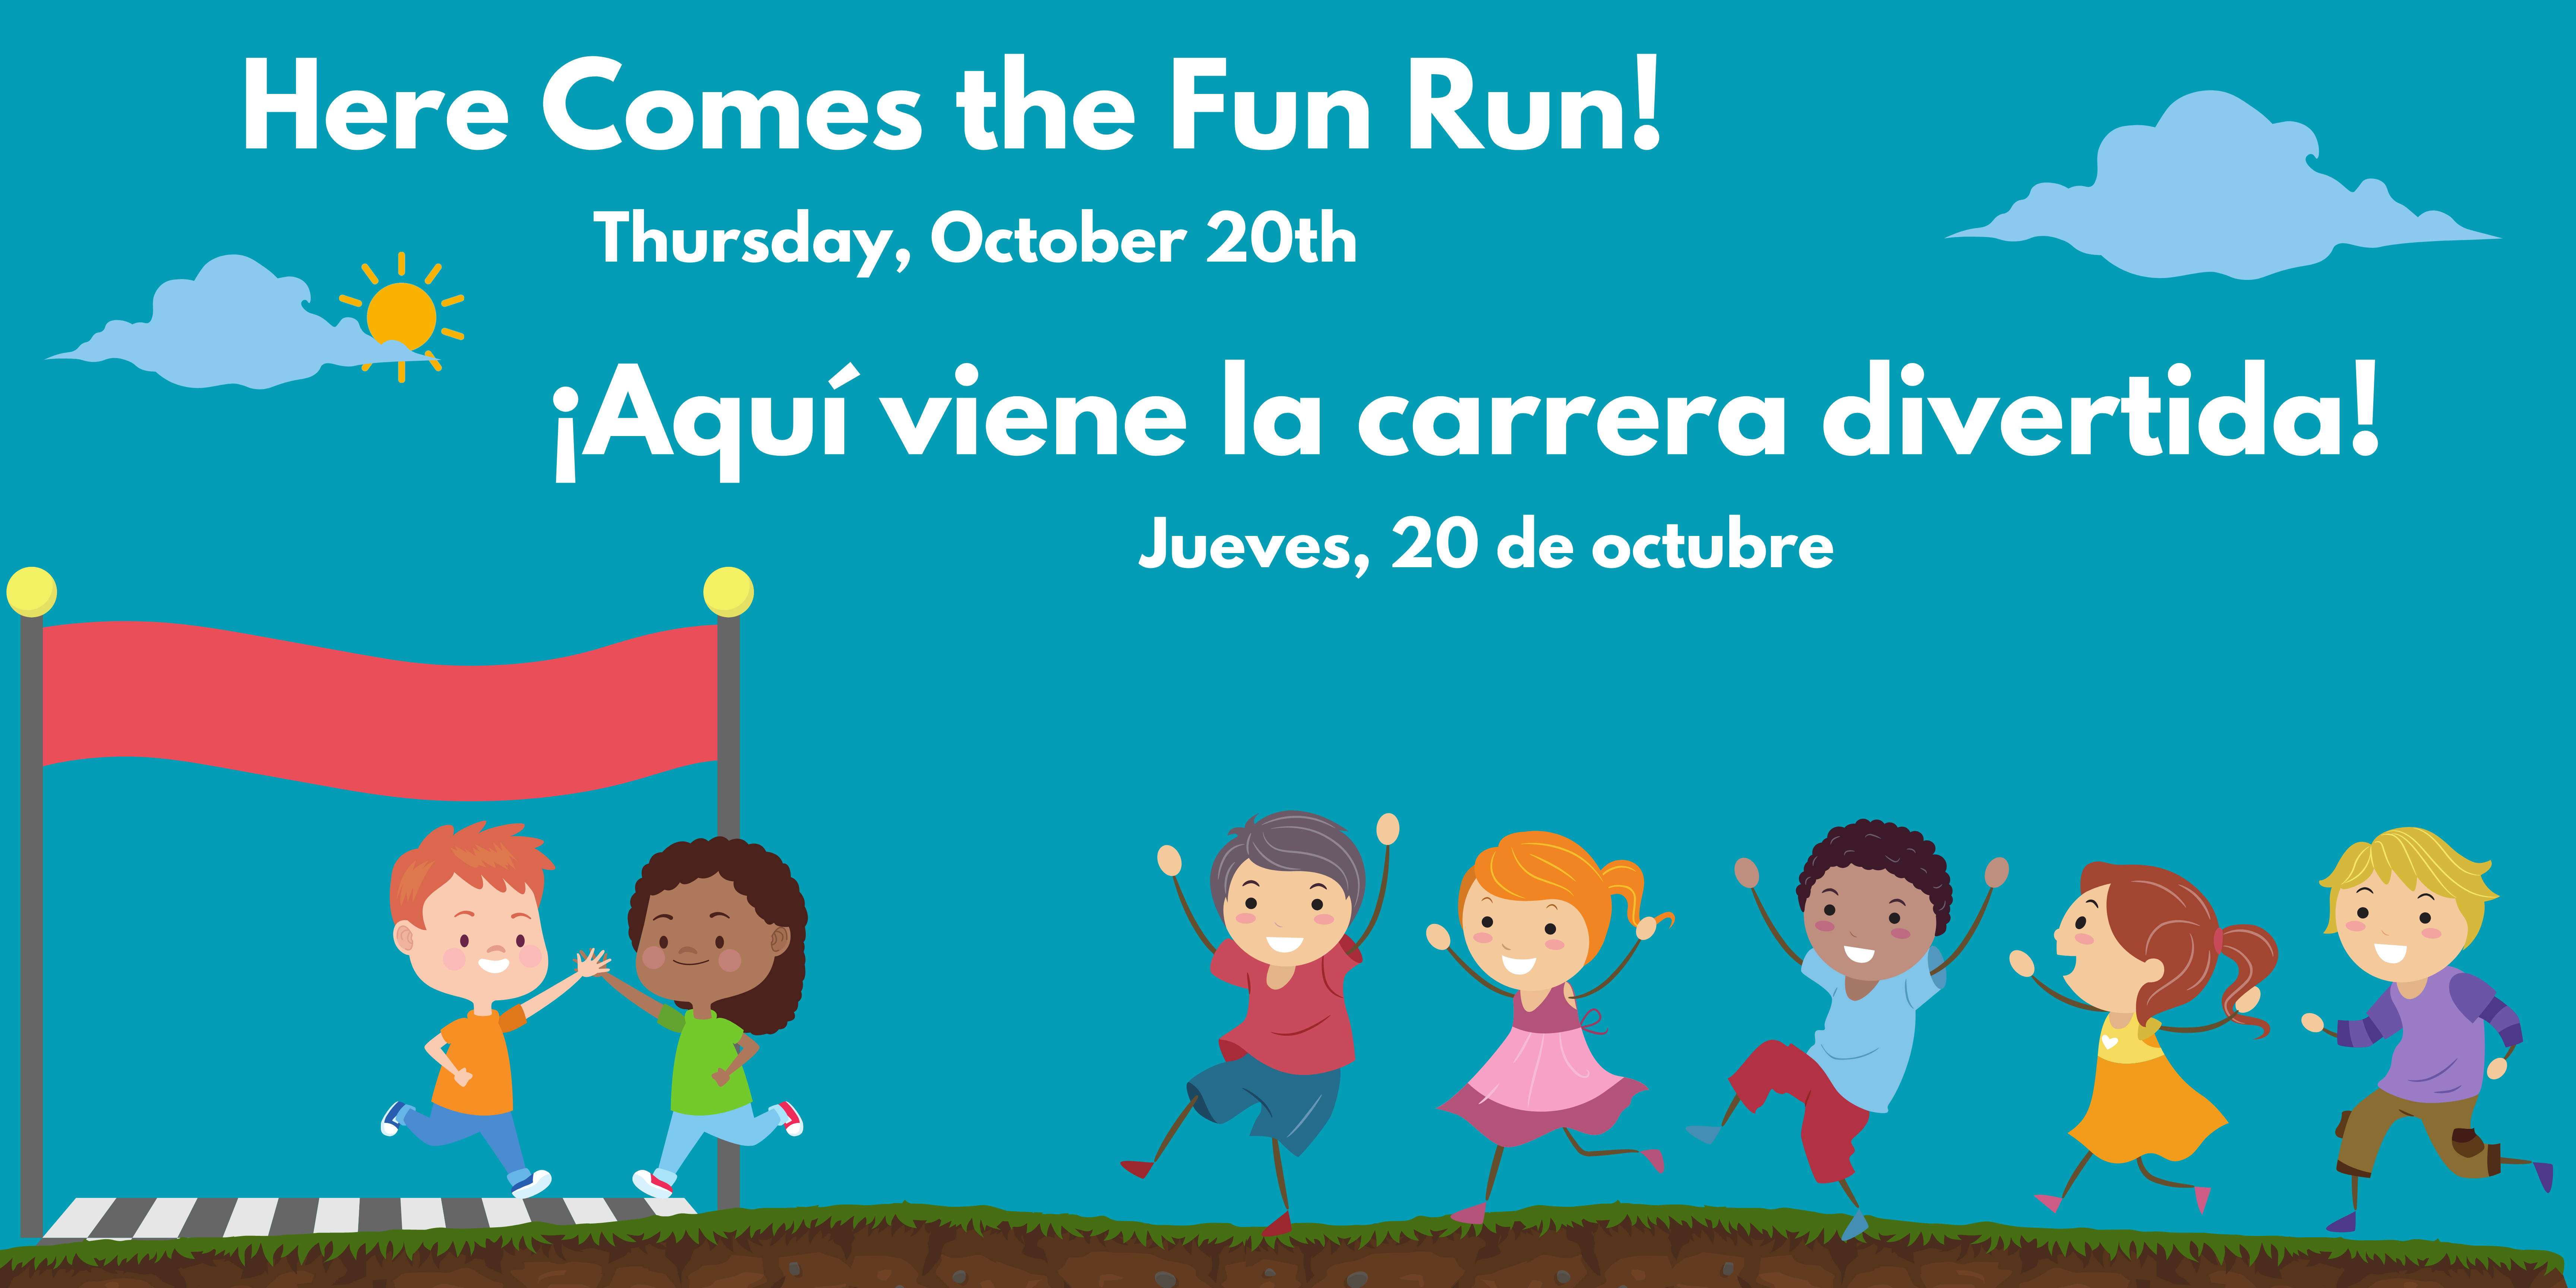 Blue background with cartoon images of children running with one child crossing a finish line. White text says, "Here comes the Fun Run! Thursday, October 20th" and "¡Aquí viene la carrera divertida! Jueves, 20 de octubre."